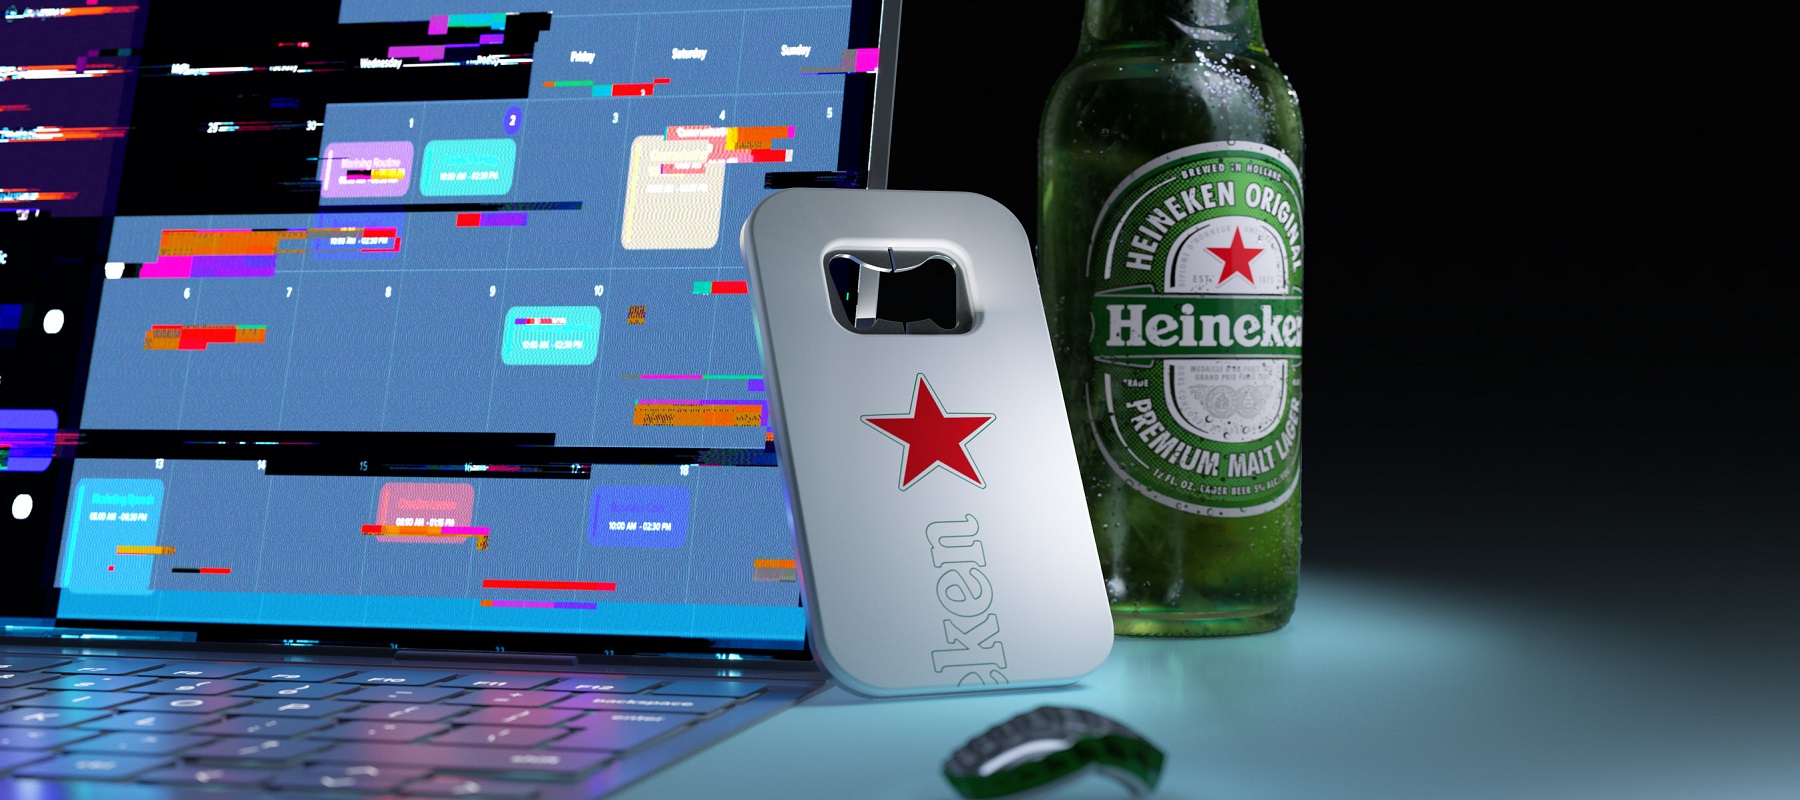 Dutch creative agency Boomerang wins at Cannes Lions for Heineken campaign